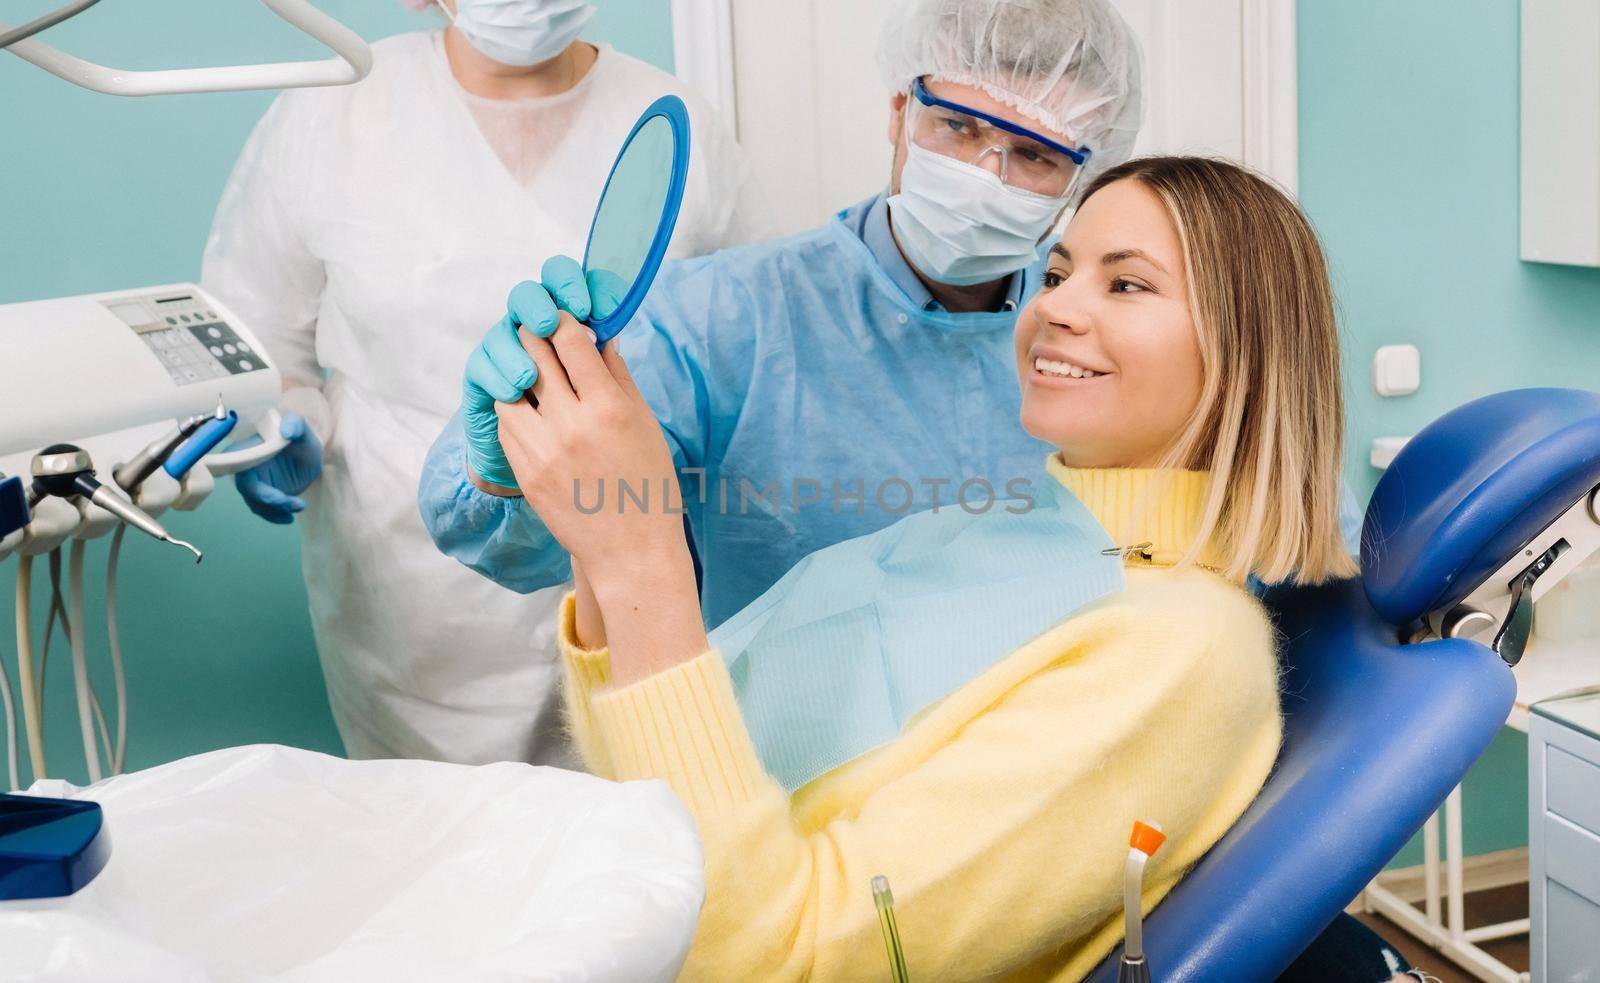 The dentist shows the client the results of his work in the mirror.